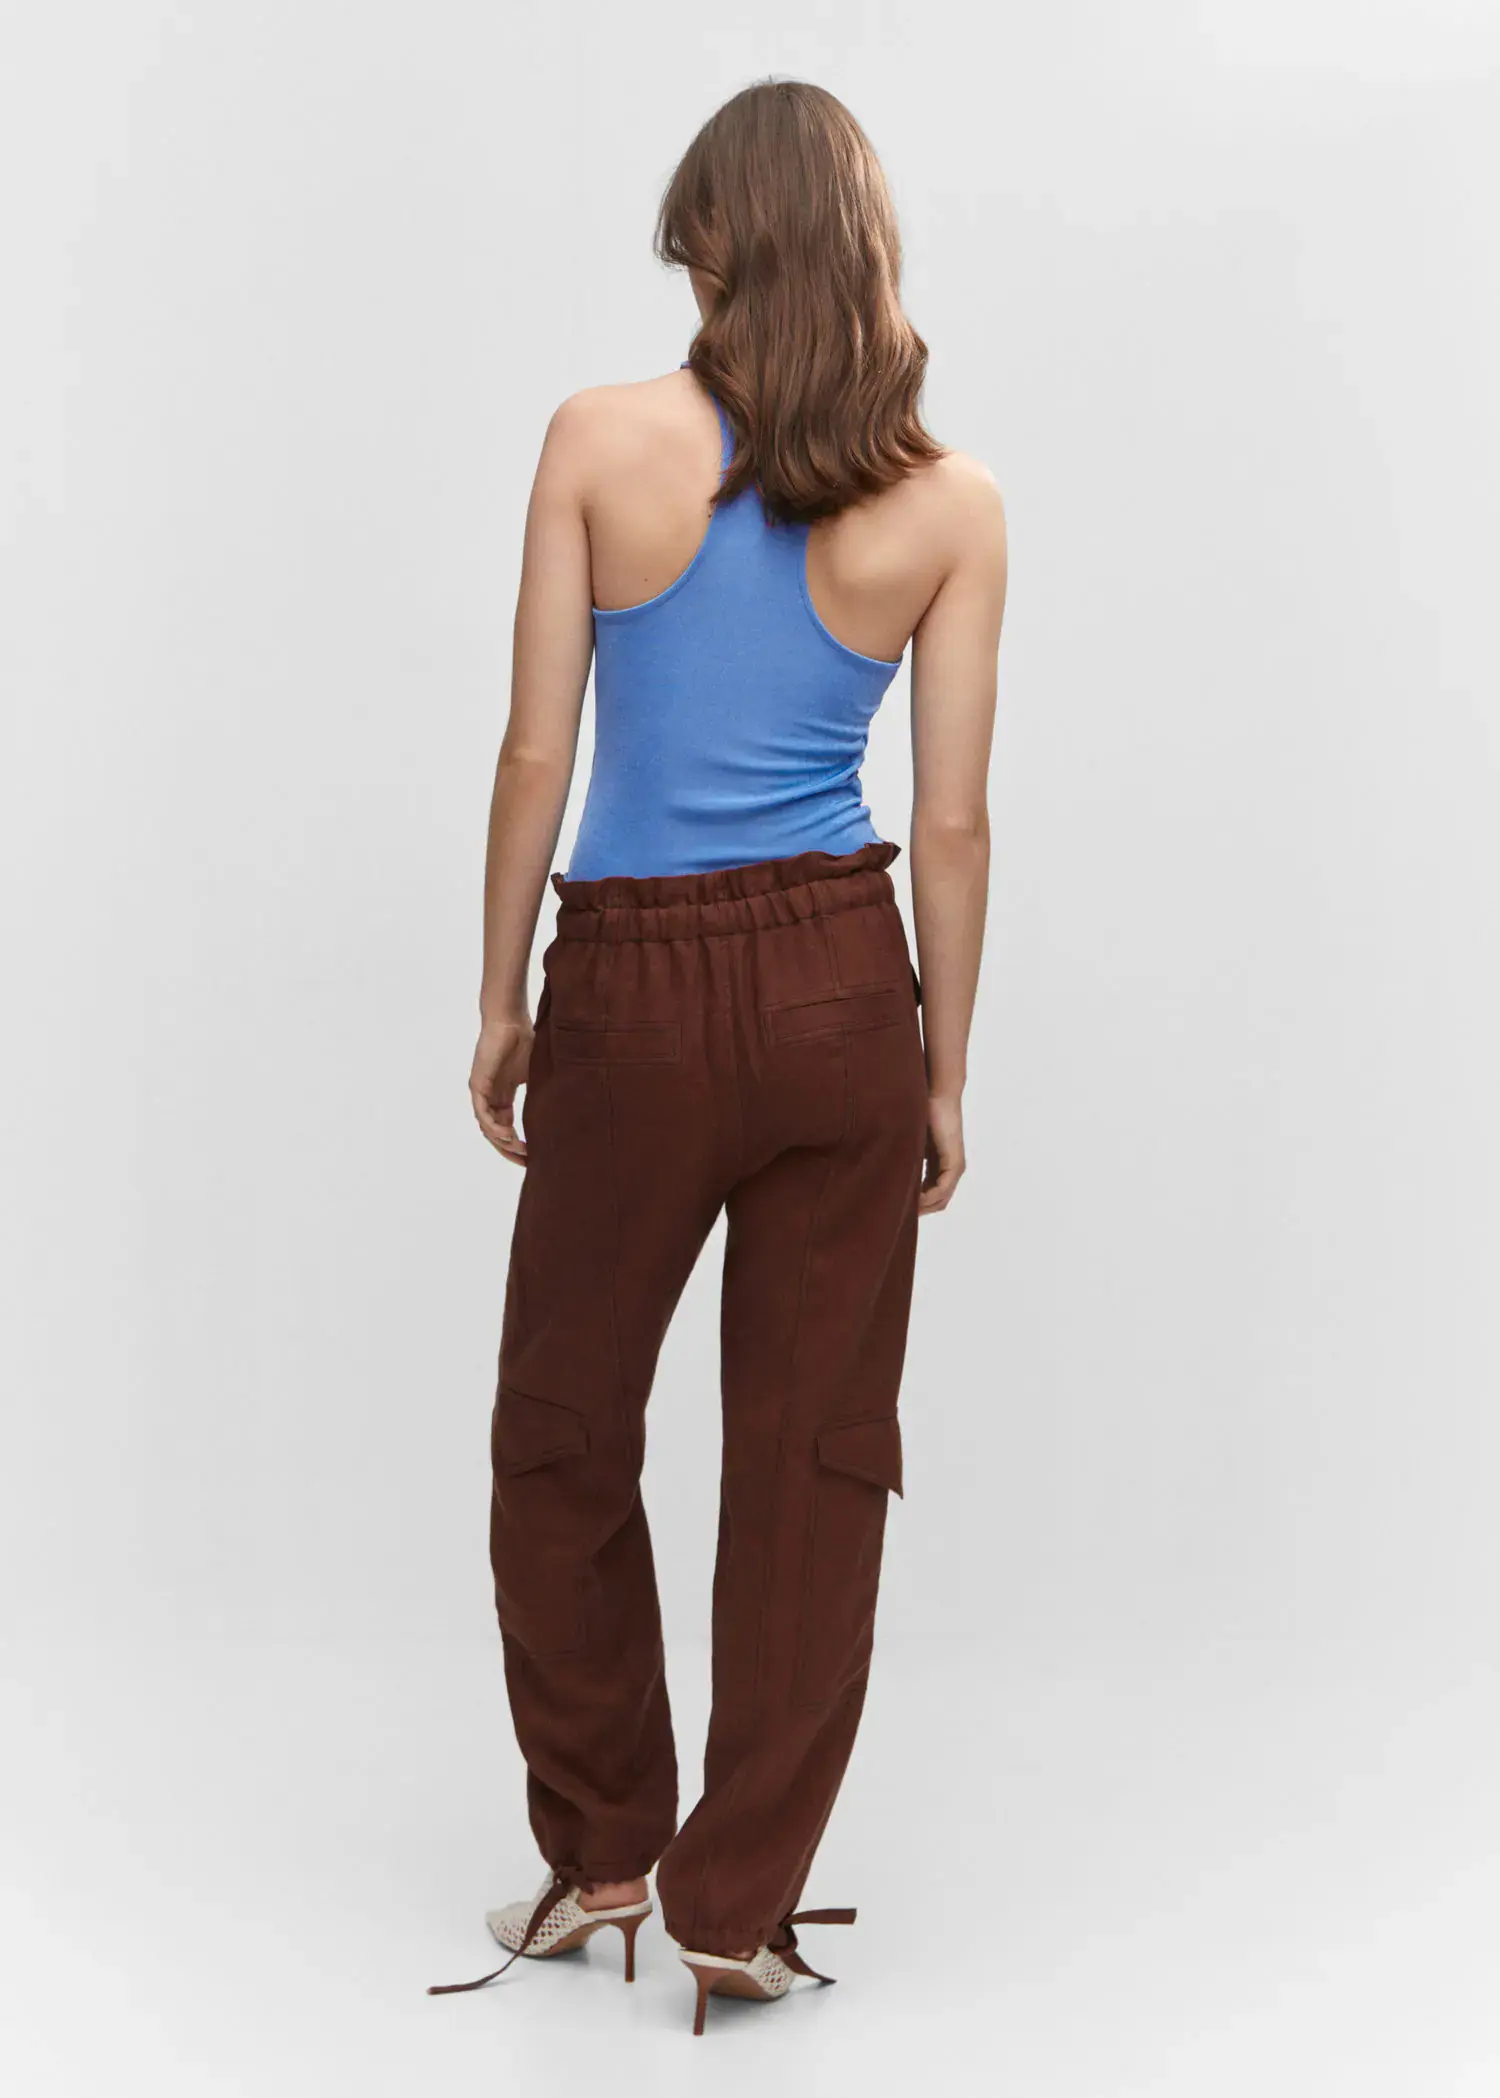 Mango Strap top. a woman wearing a blue tank top and brown pants. 